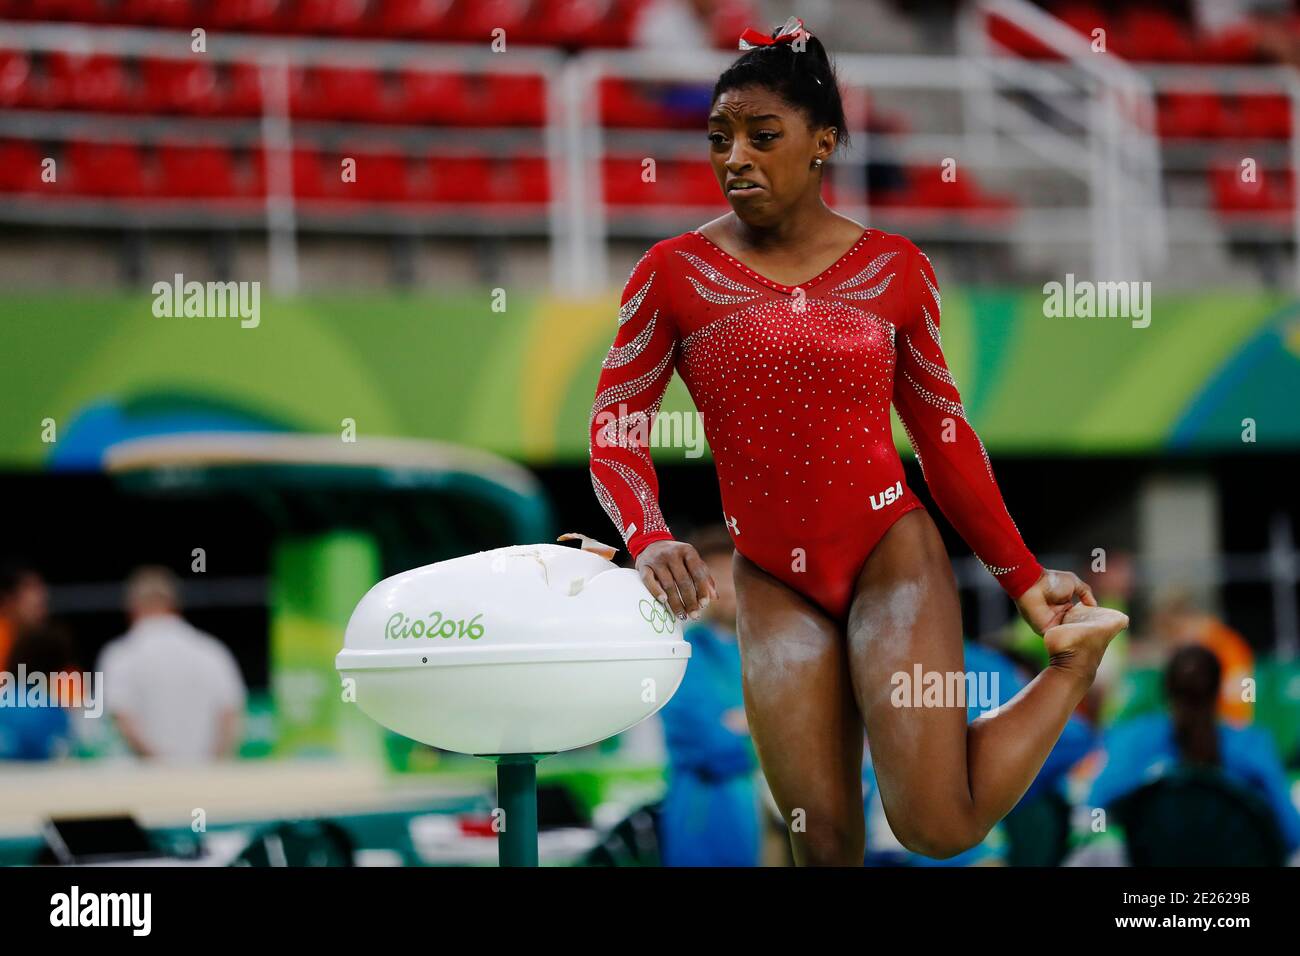 Simone Biles At The Rio 16 Summer Olympic Games Artistic Gymnastics Athlete Of Team Usa Performs A Training Session Prior To The Medal Competition Stock Photo Alamy